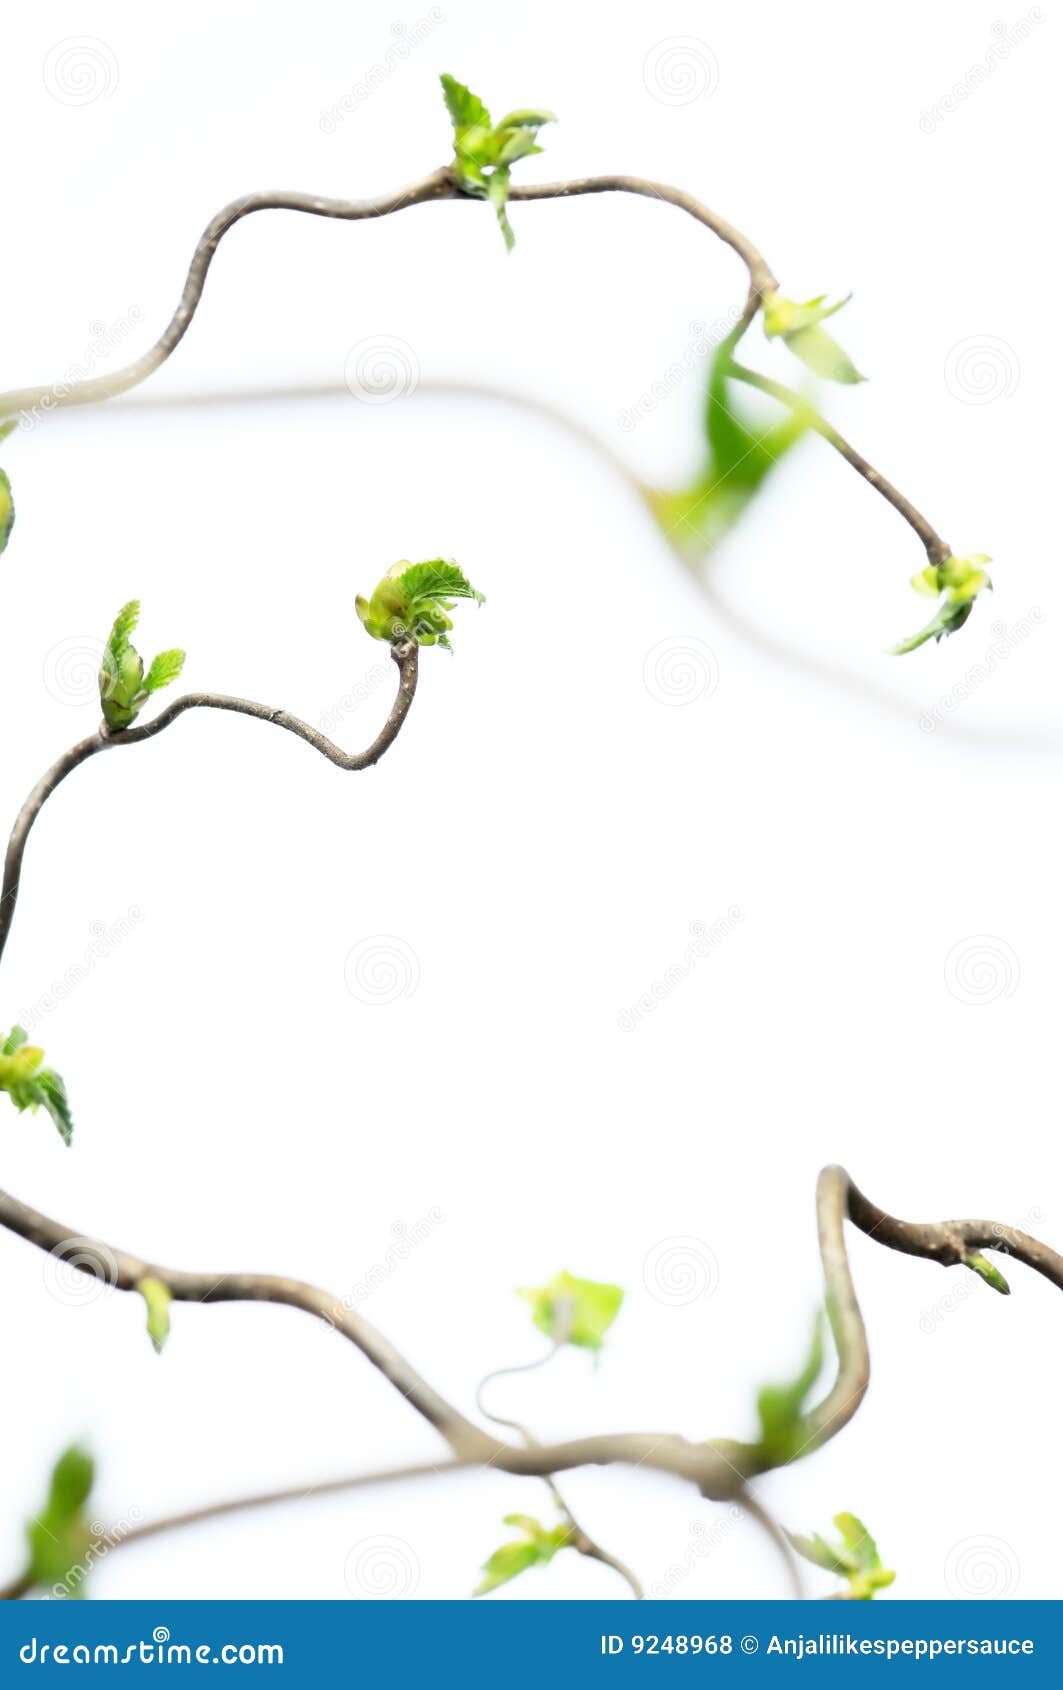 gnarly branches with young leaves